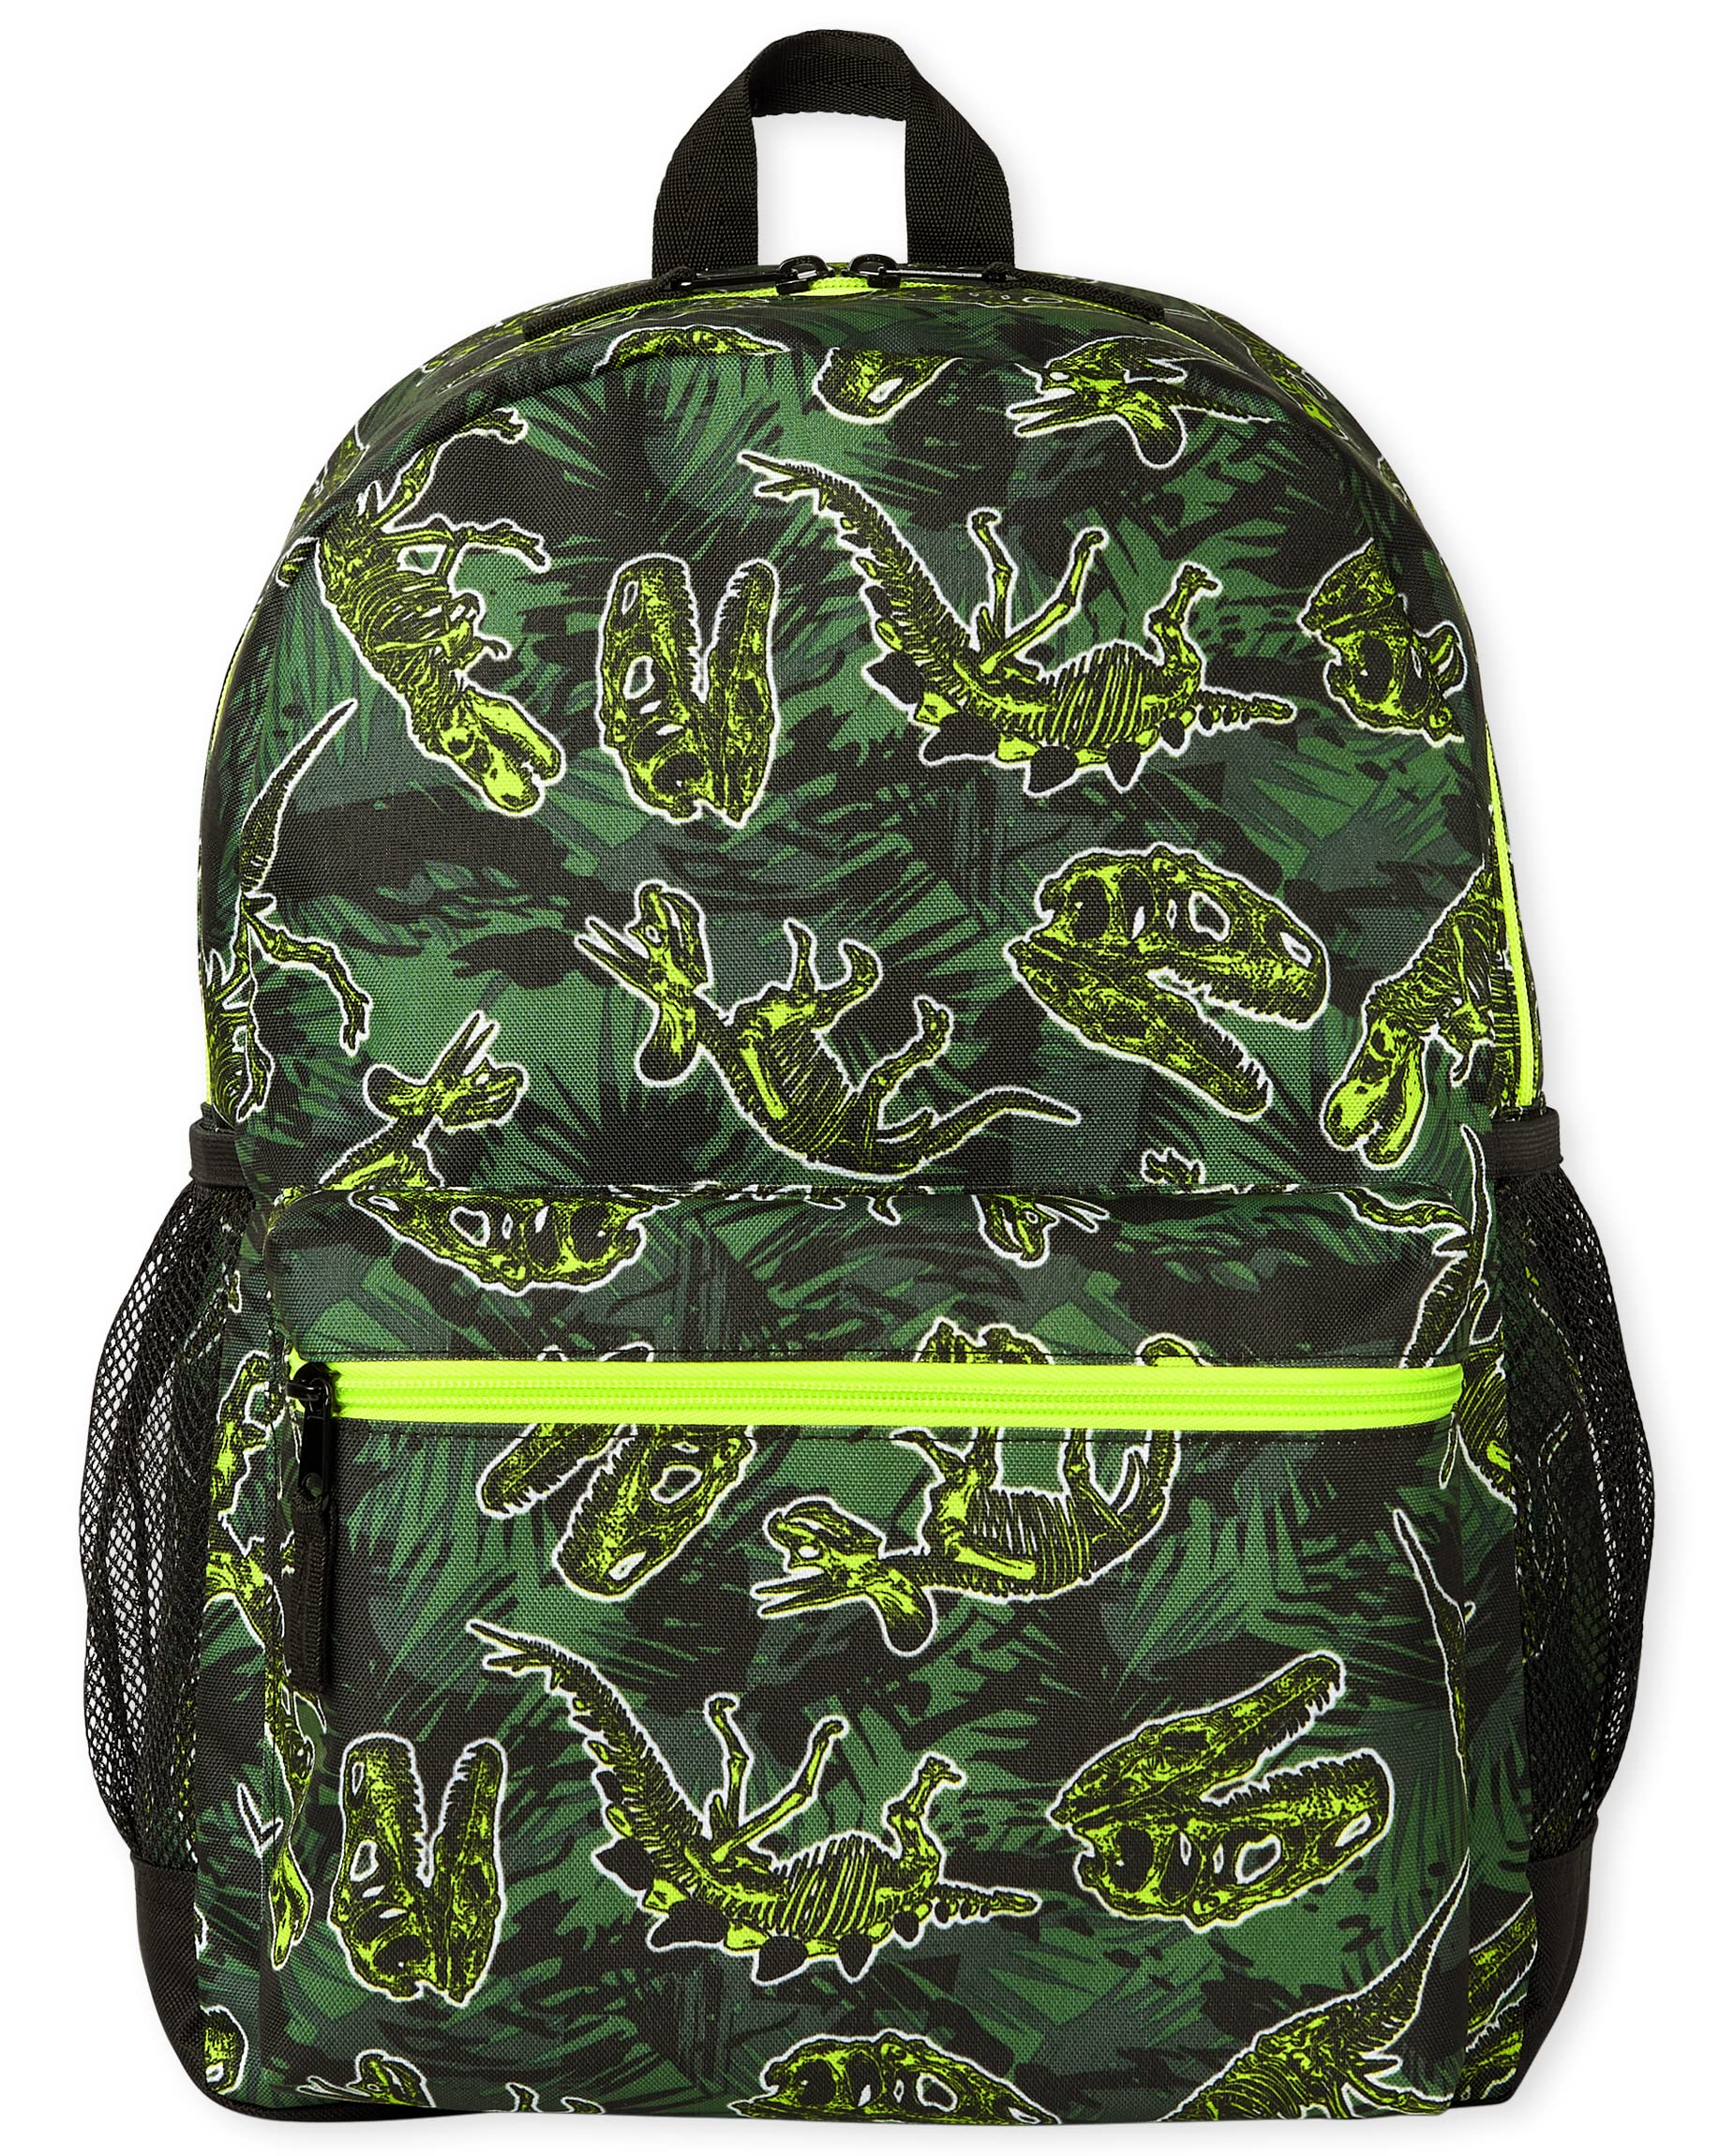 The Children's Place Kids' Backpack (Green Dino or Multicolor Tie Dye) $9.59 + Free Shipping w/ Prime or on $35+